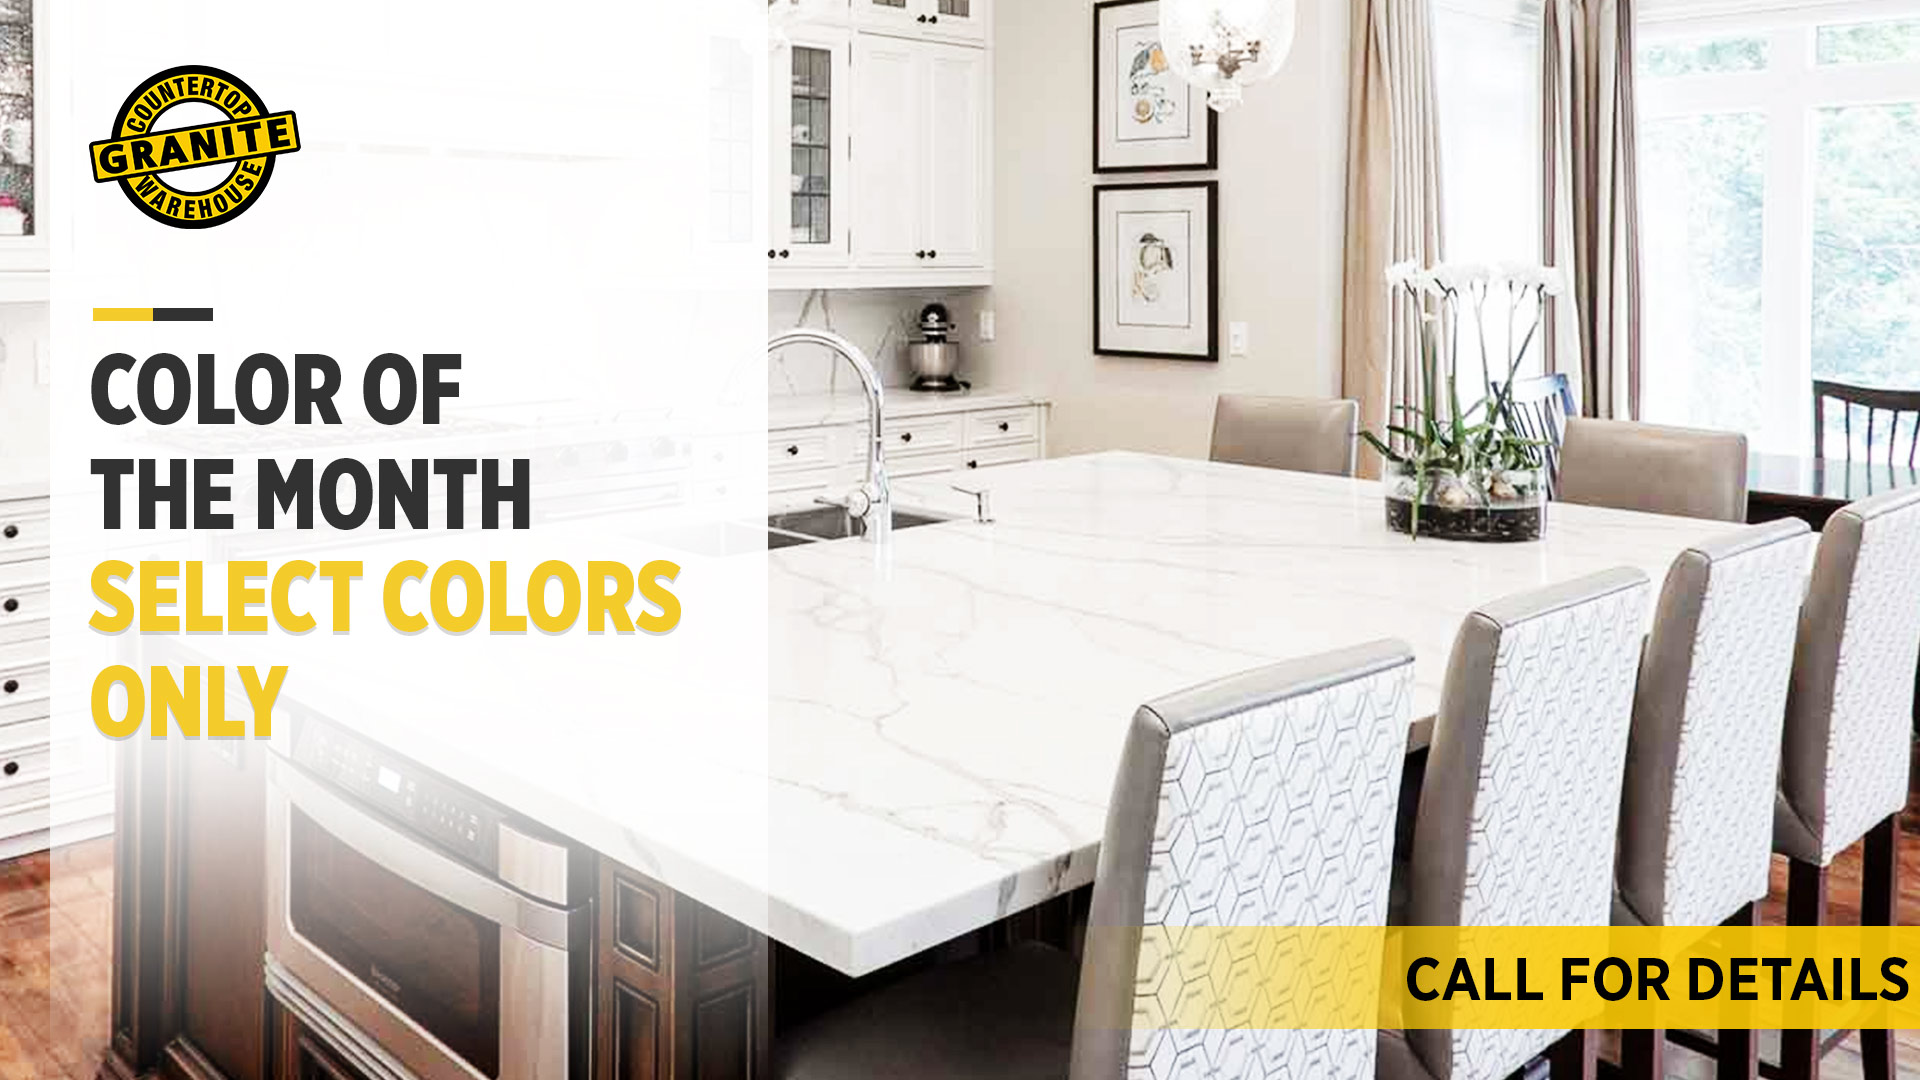 AA Granite Fabricator Direct-Color of the month